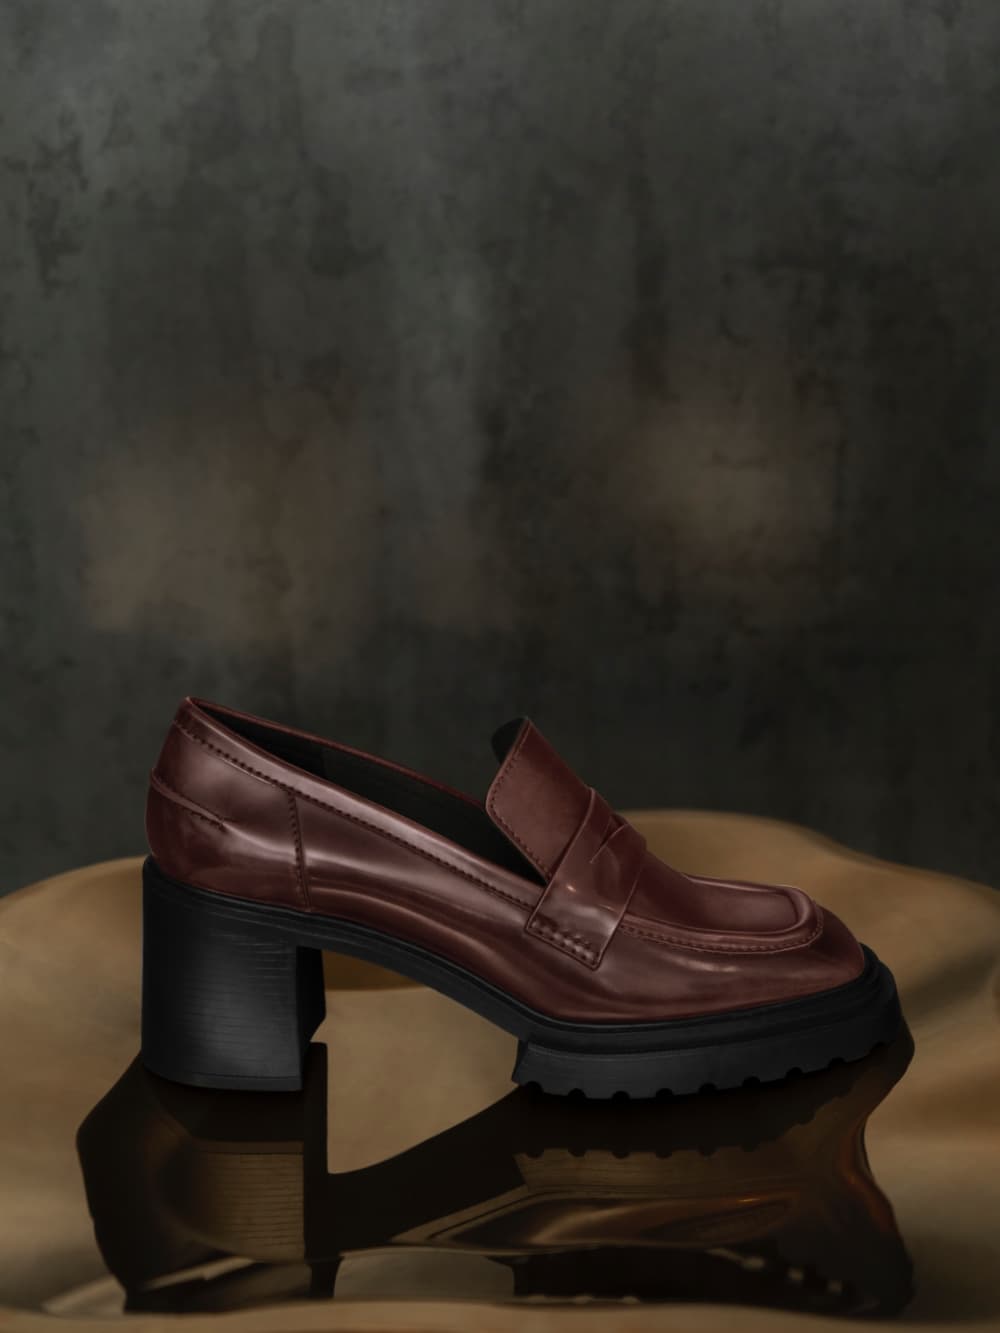 Women's dark brown penny loafer pumps - CHARLES & KEITH